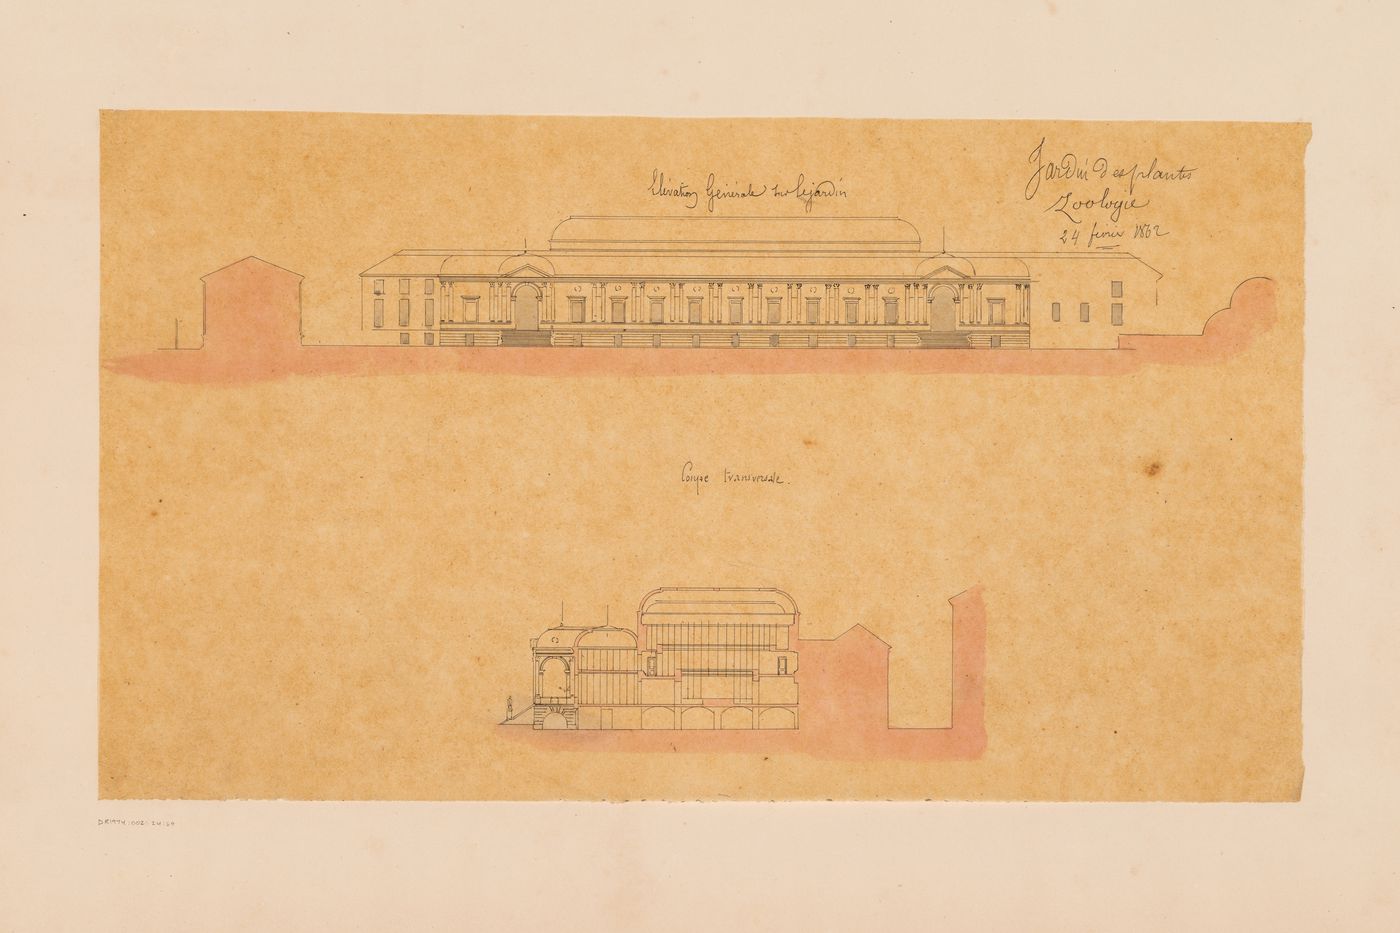 Project for a Galerie de zoologie, 1862: Principal elevation and cross section